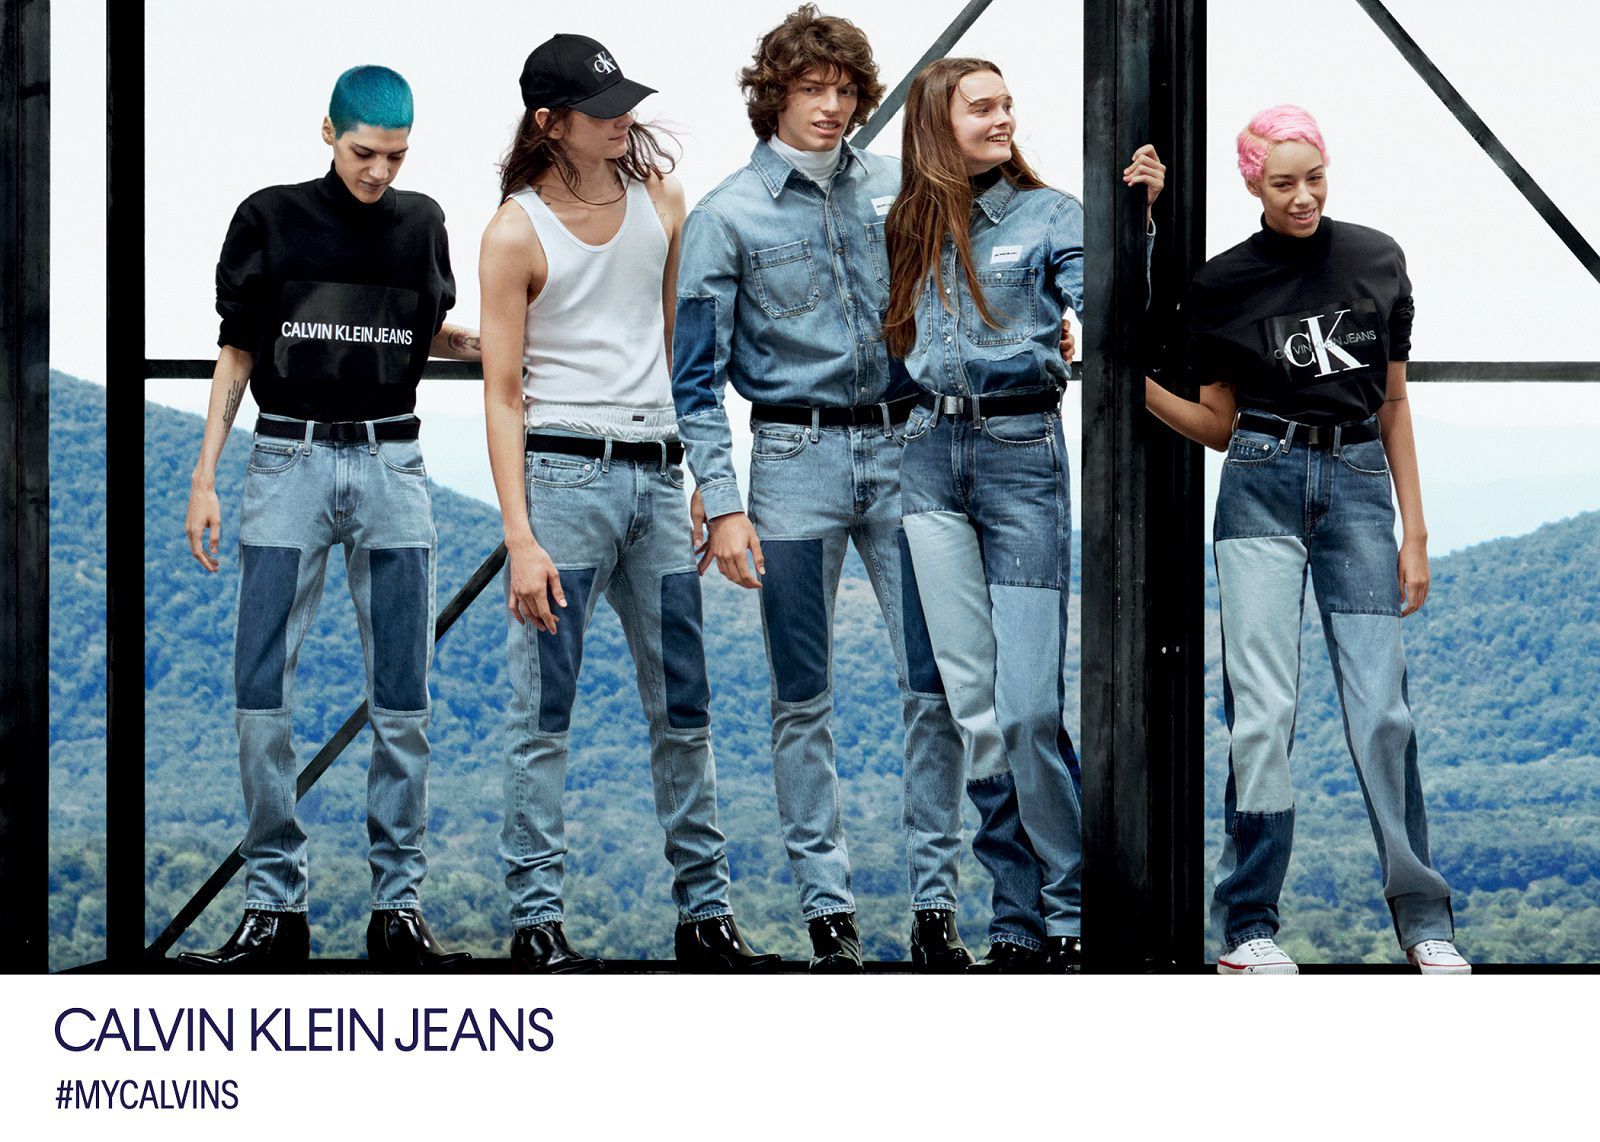 Calvin Klein presents the latest FW18 campaign Together in denim